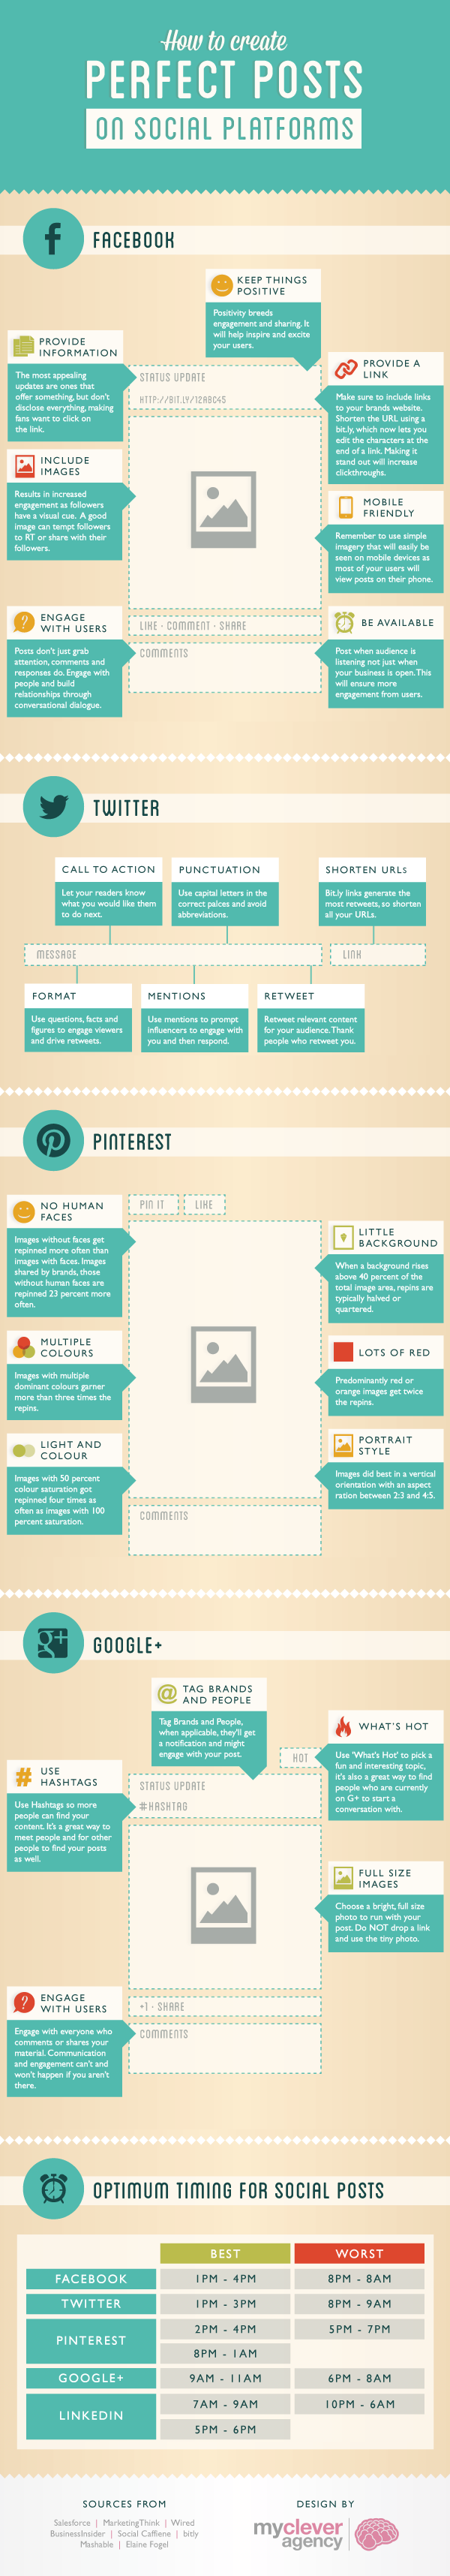 How To Create The Perfect Facebook, Twitter, Google+ & Pinterest Post